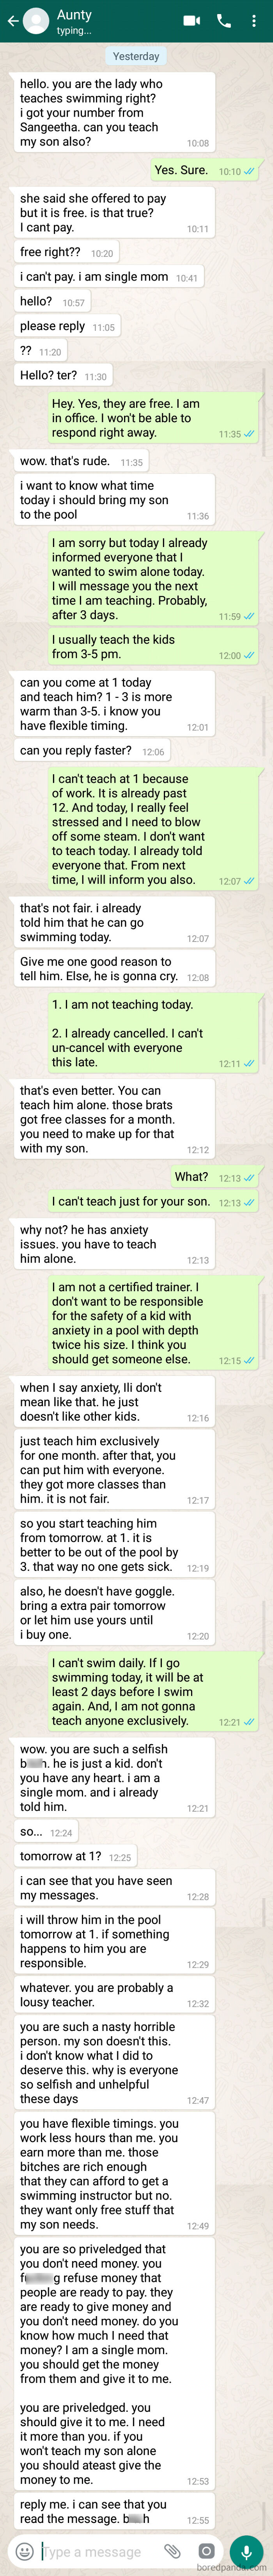 I Teach Swimming To Kids For Free Even Though I Was Offered Money. Mombie Demands That I Have To Teach Her Son Exclusively. And To Give Her The Money Offered As I Don't Need It